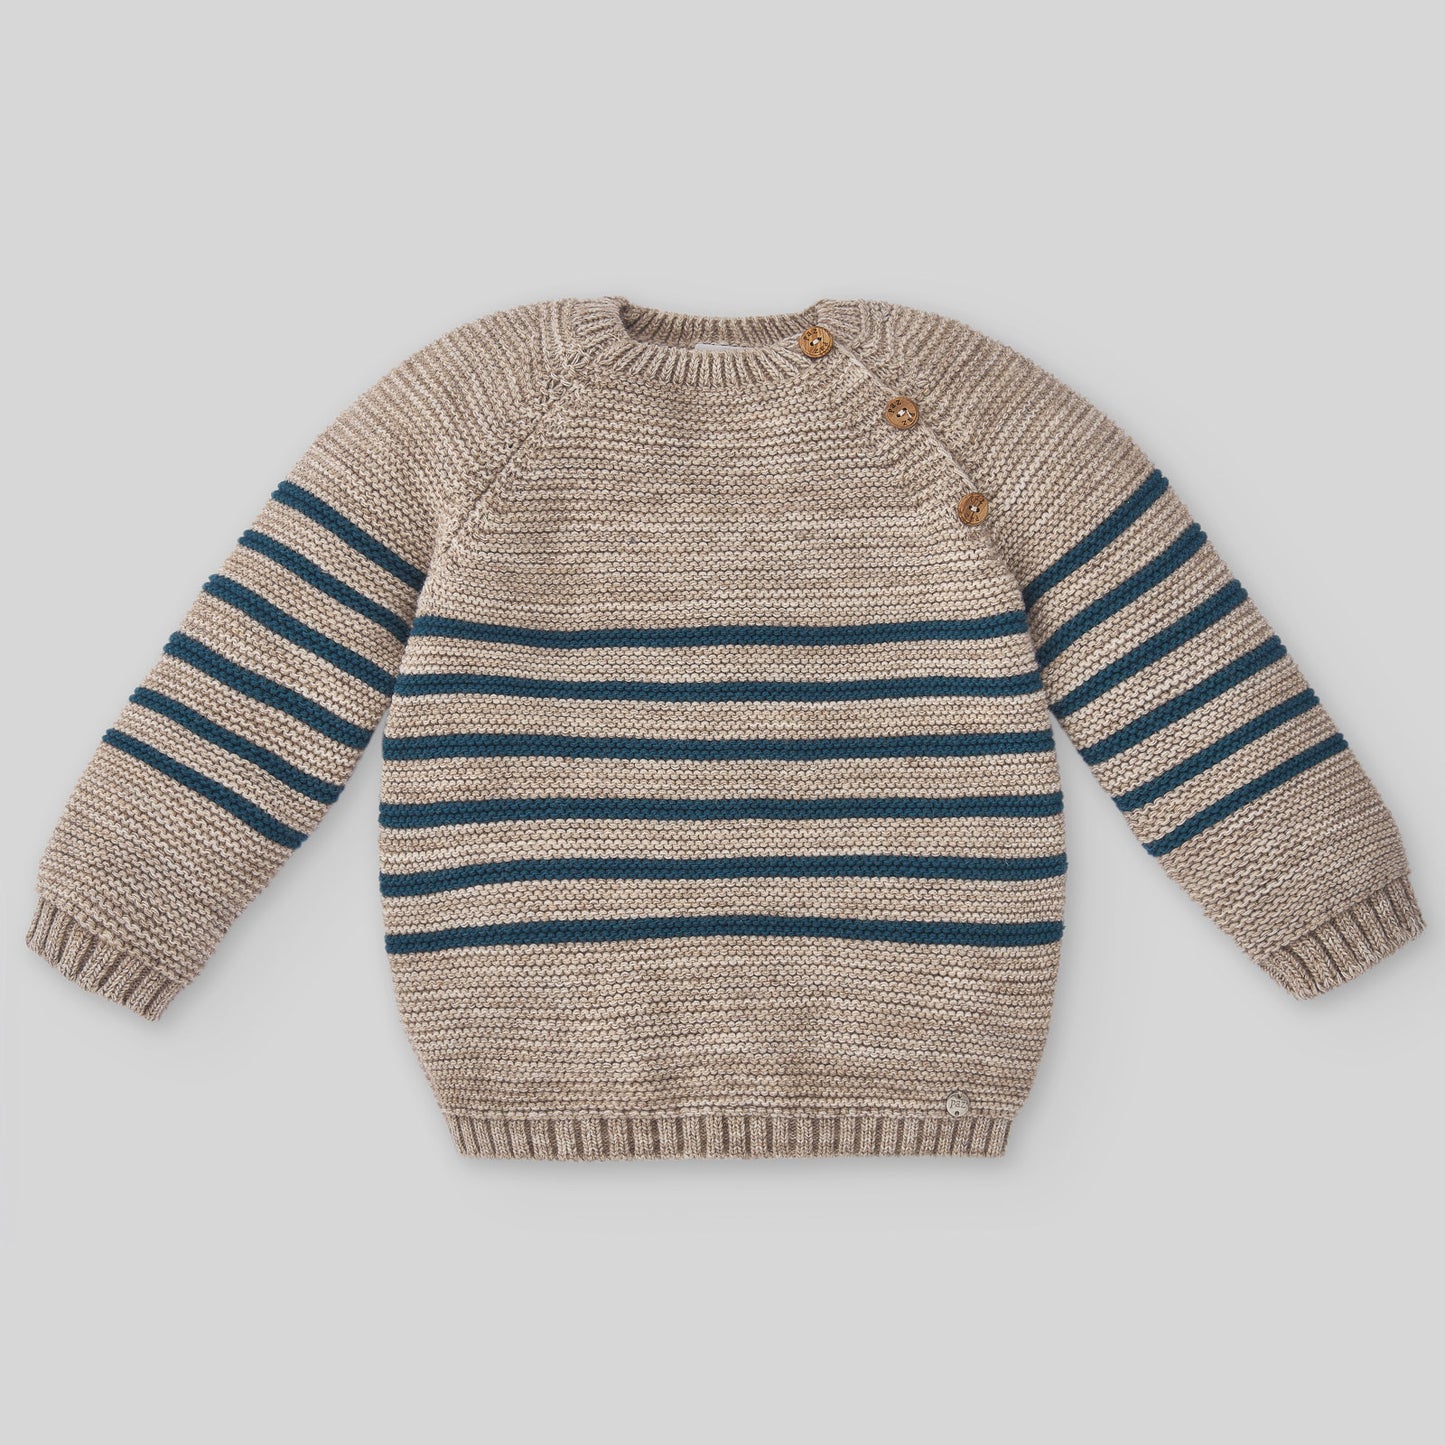 Paz Rodriguez Puccini Knit Infant Boy Pullover